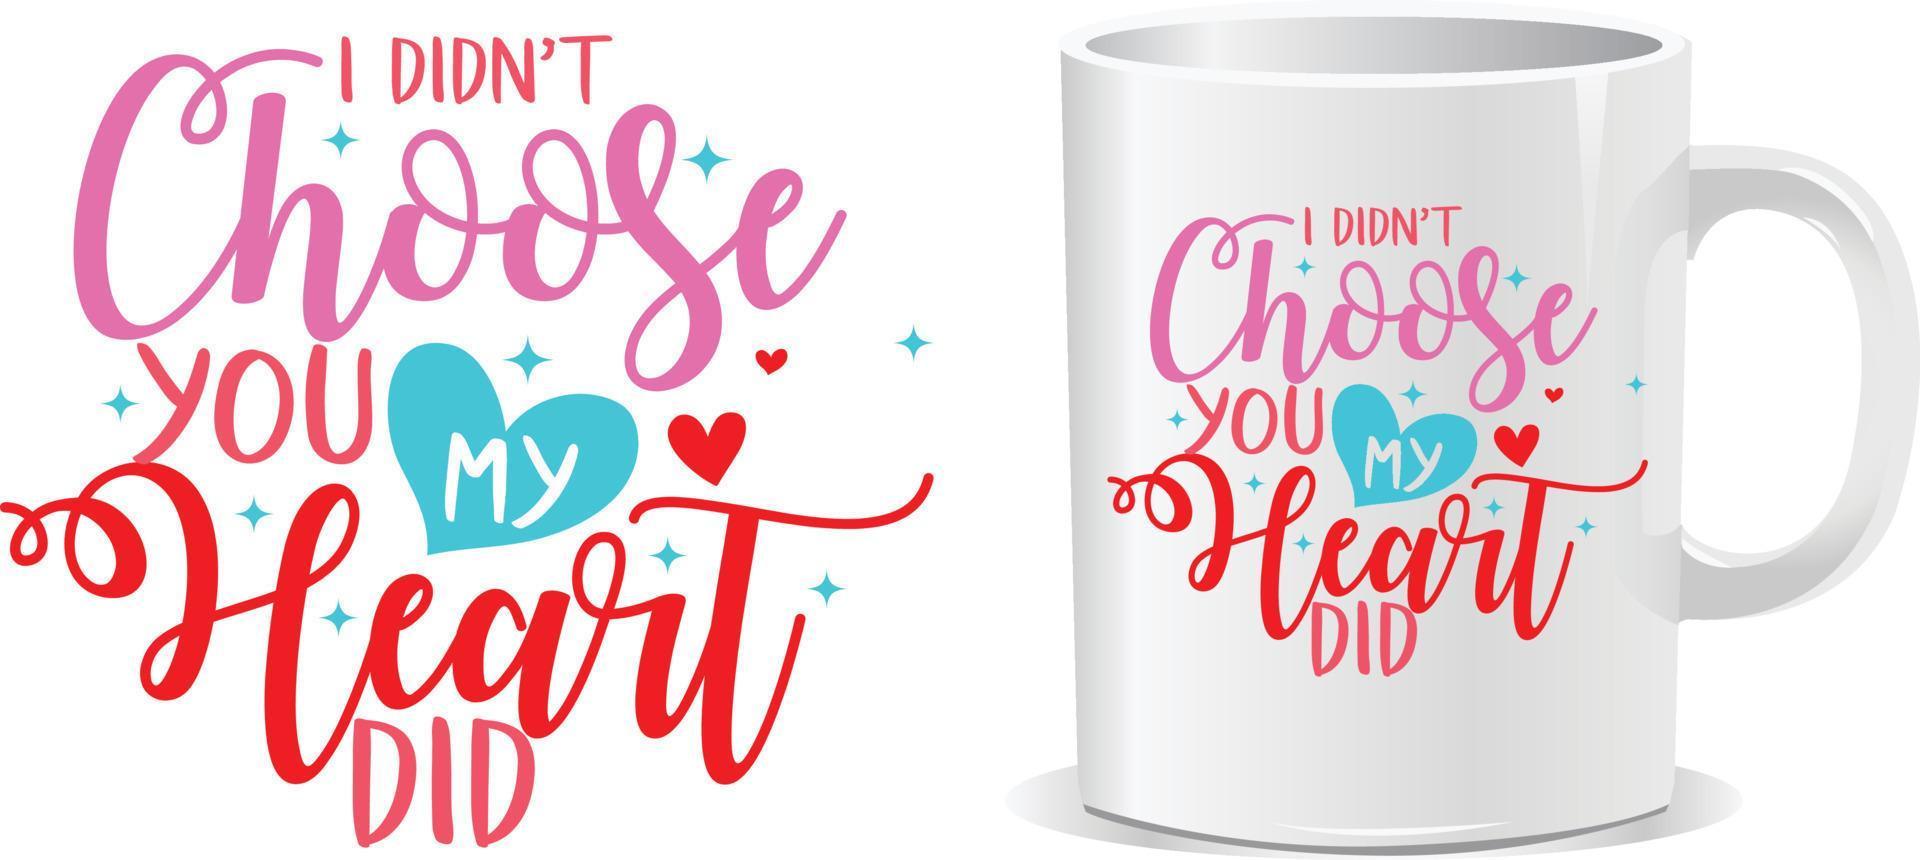 I don't choose you my heart did Happy valentine's day quotes mug design vector